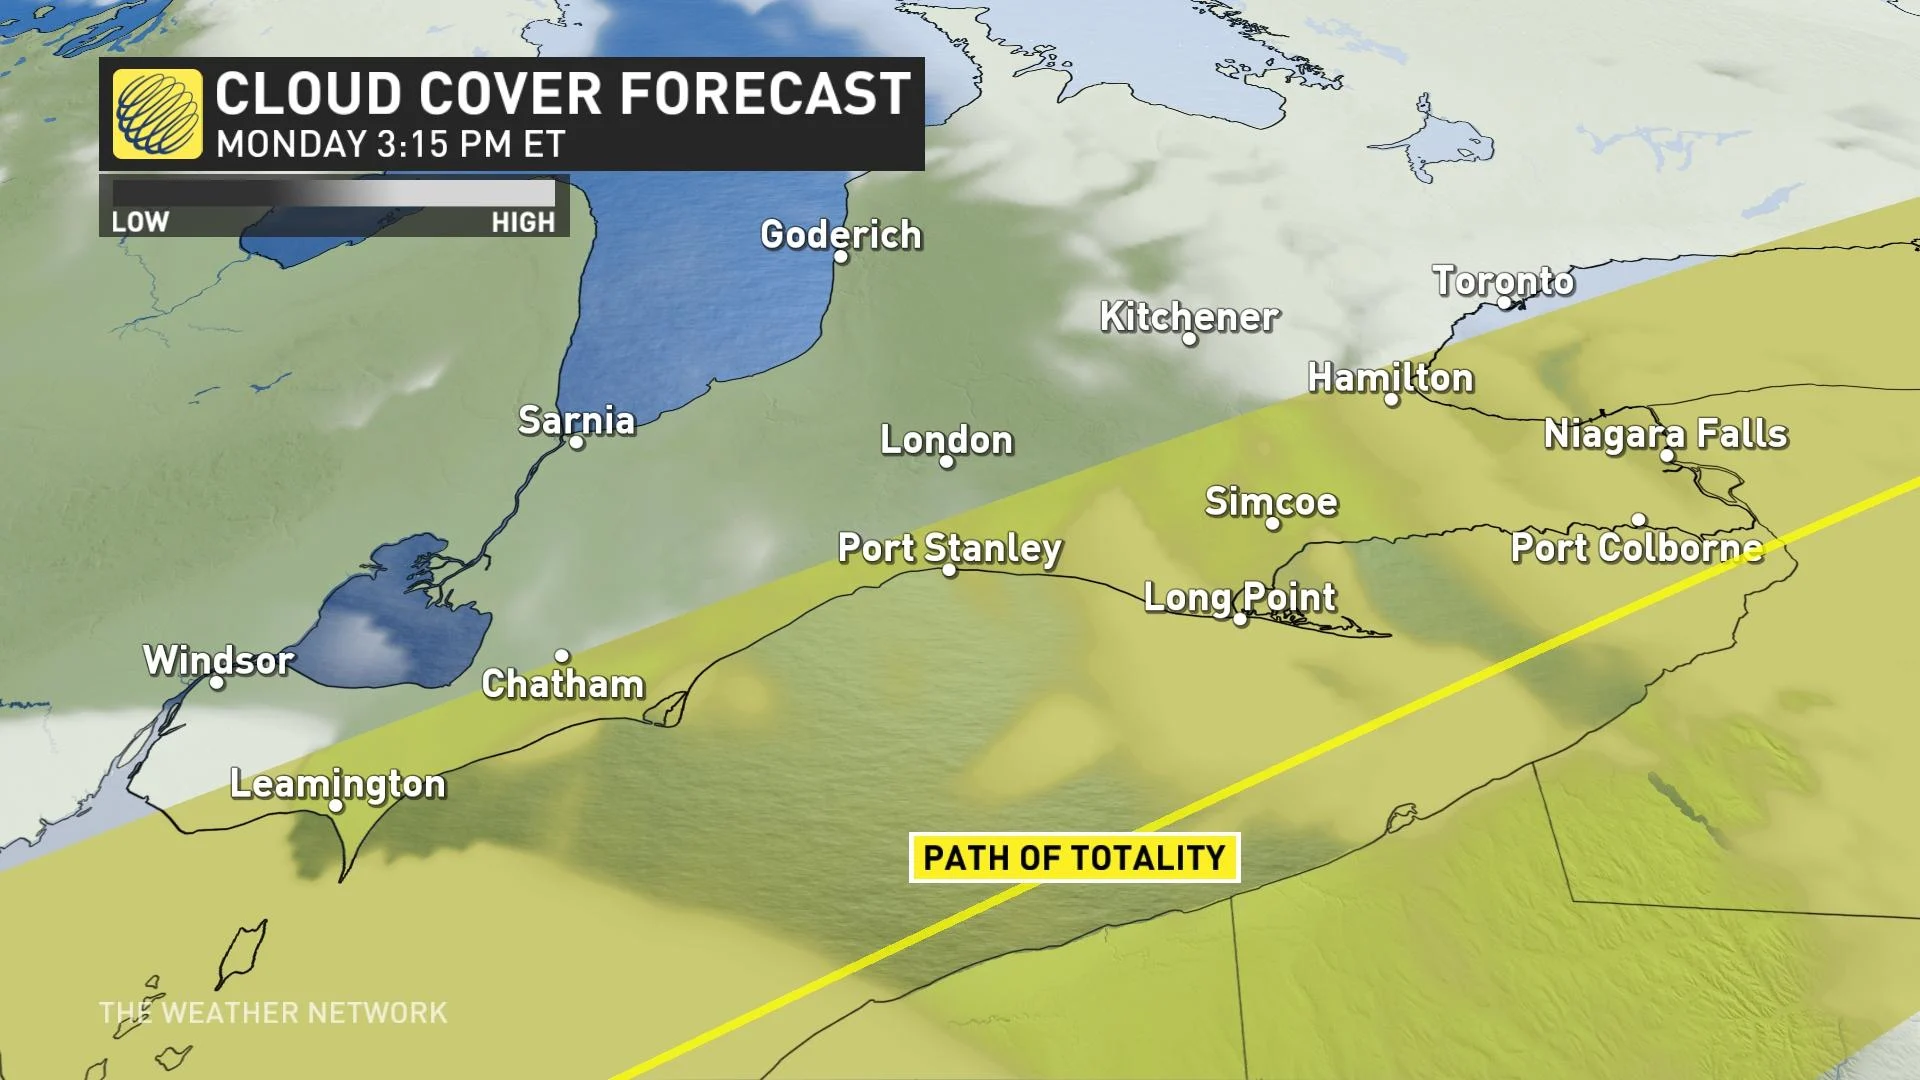 Ontario cloud cover forecast timing for Monday, April 7